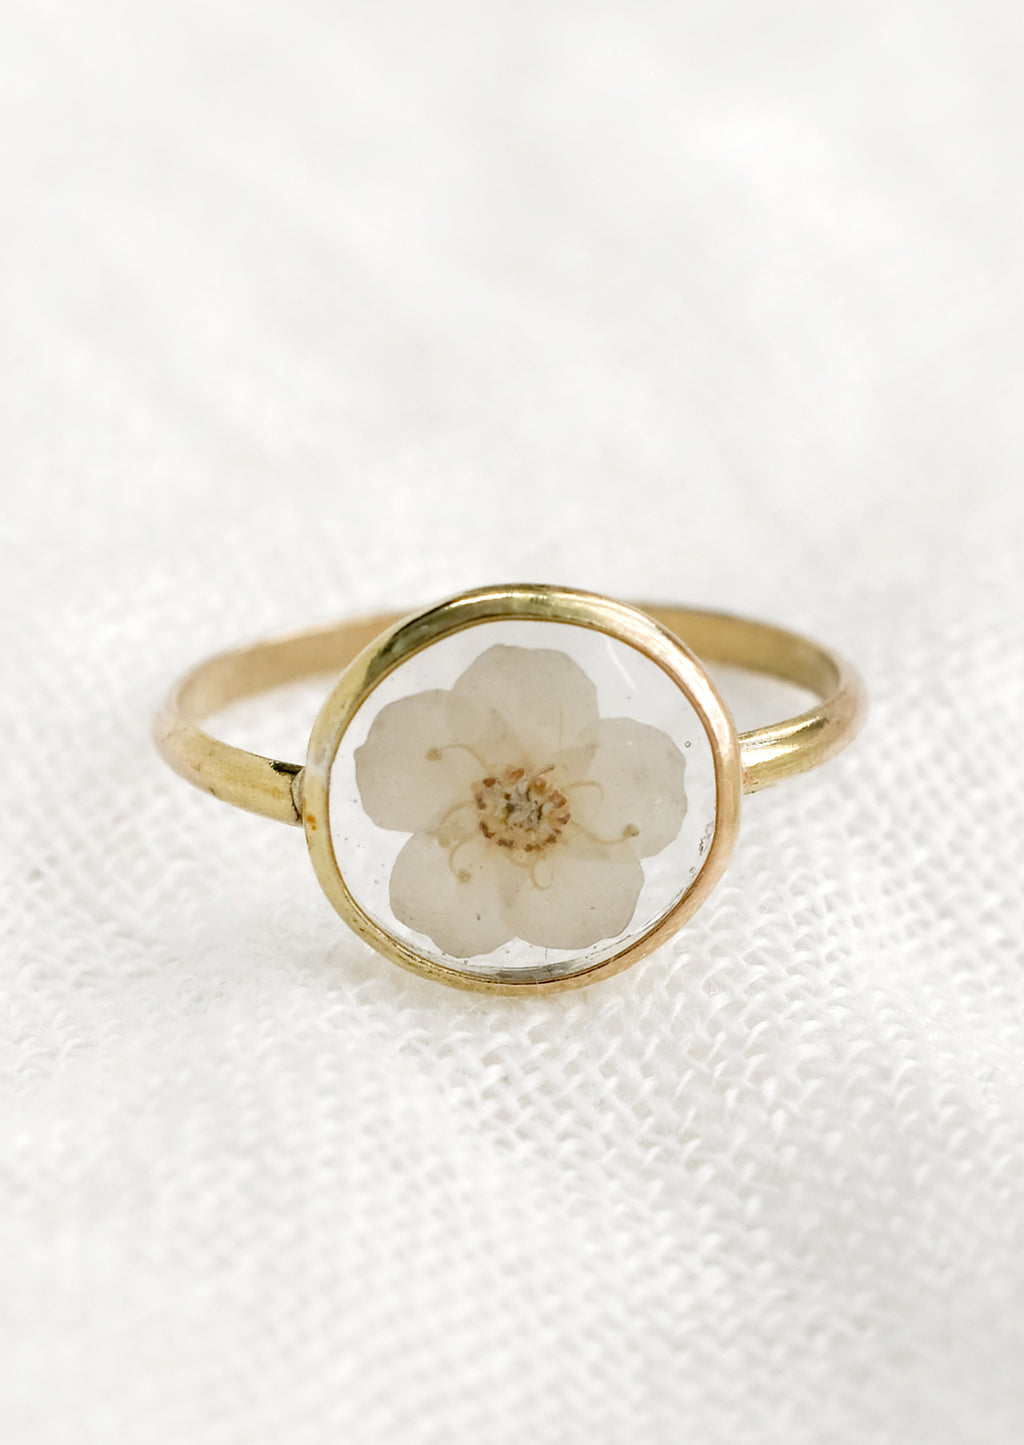 Size 6 / White: A gold round bezel ring showing white flower on clear background.